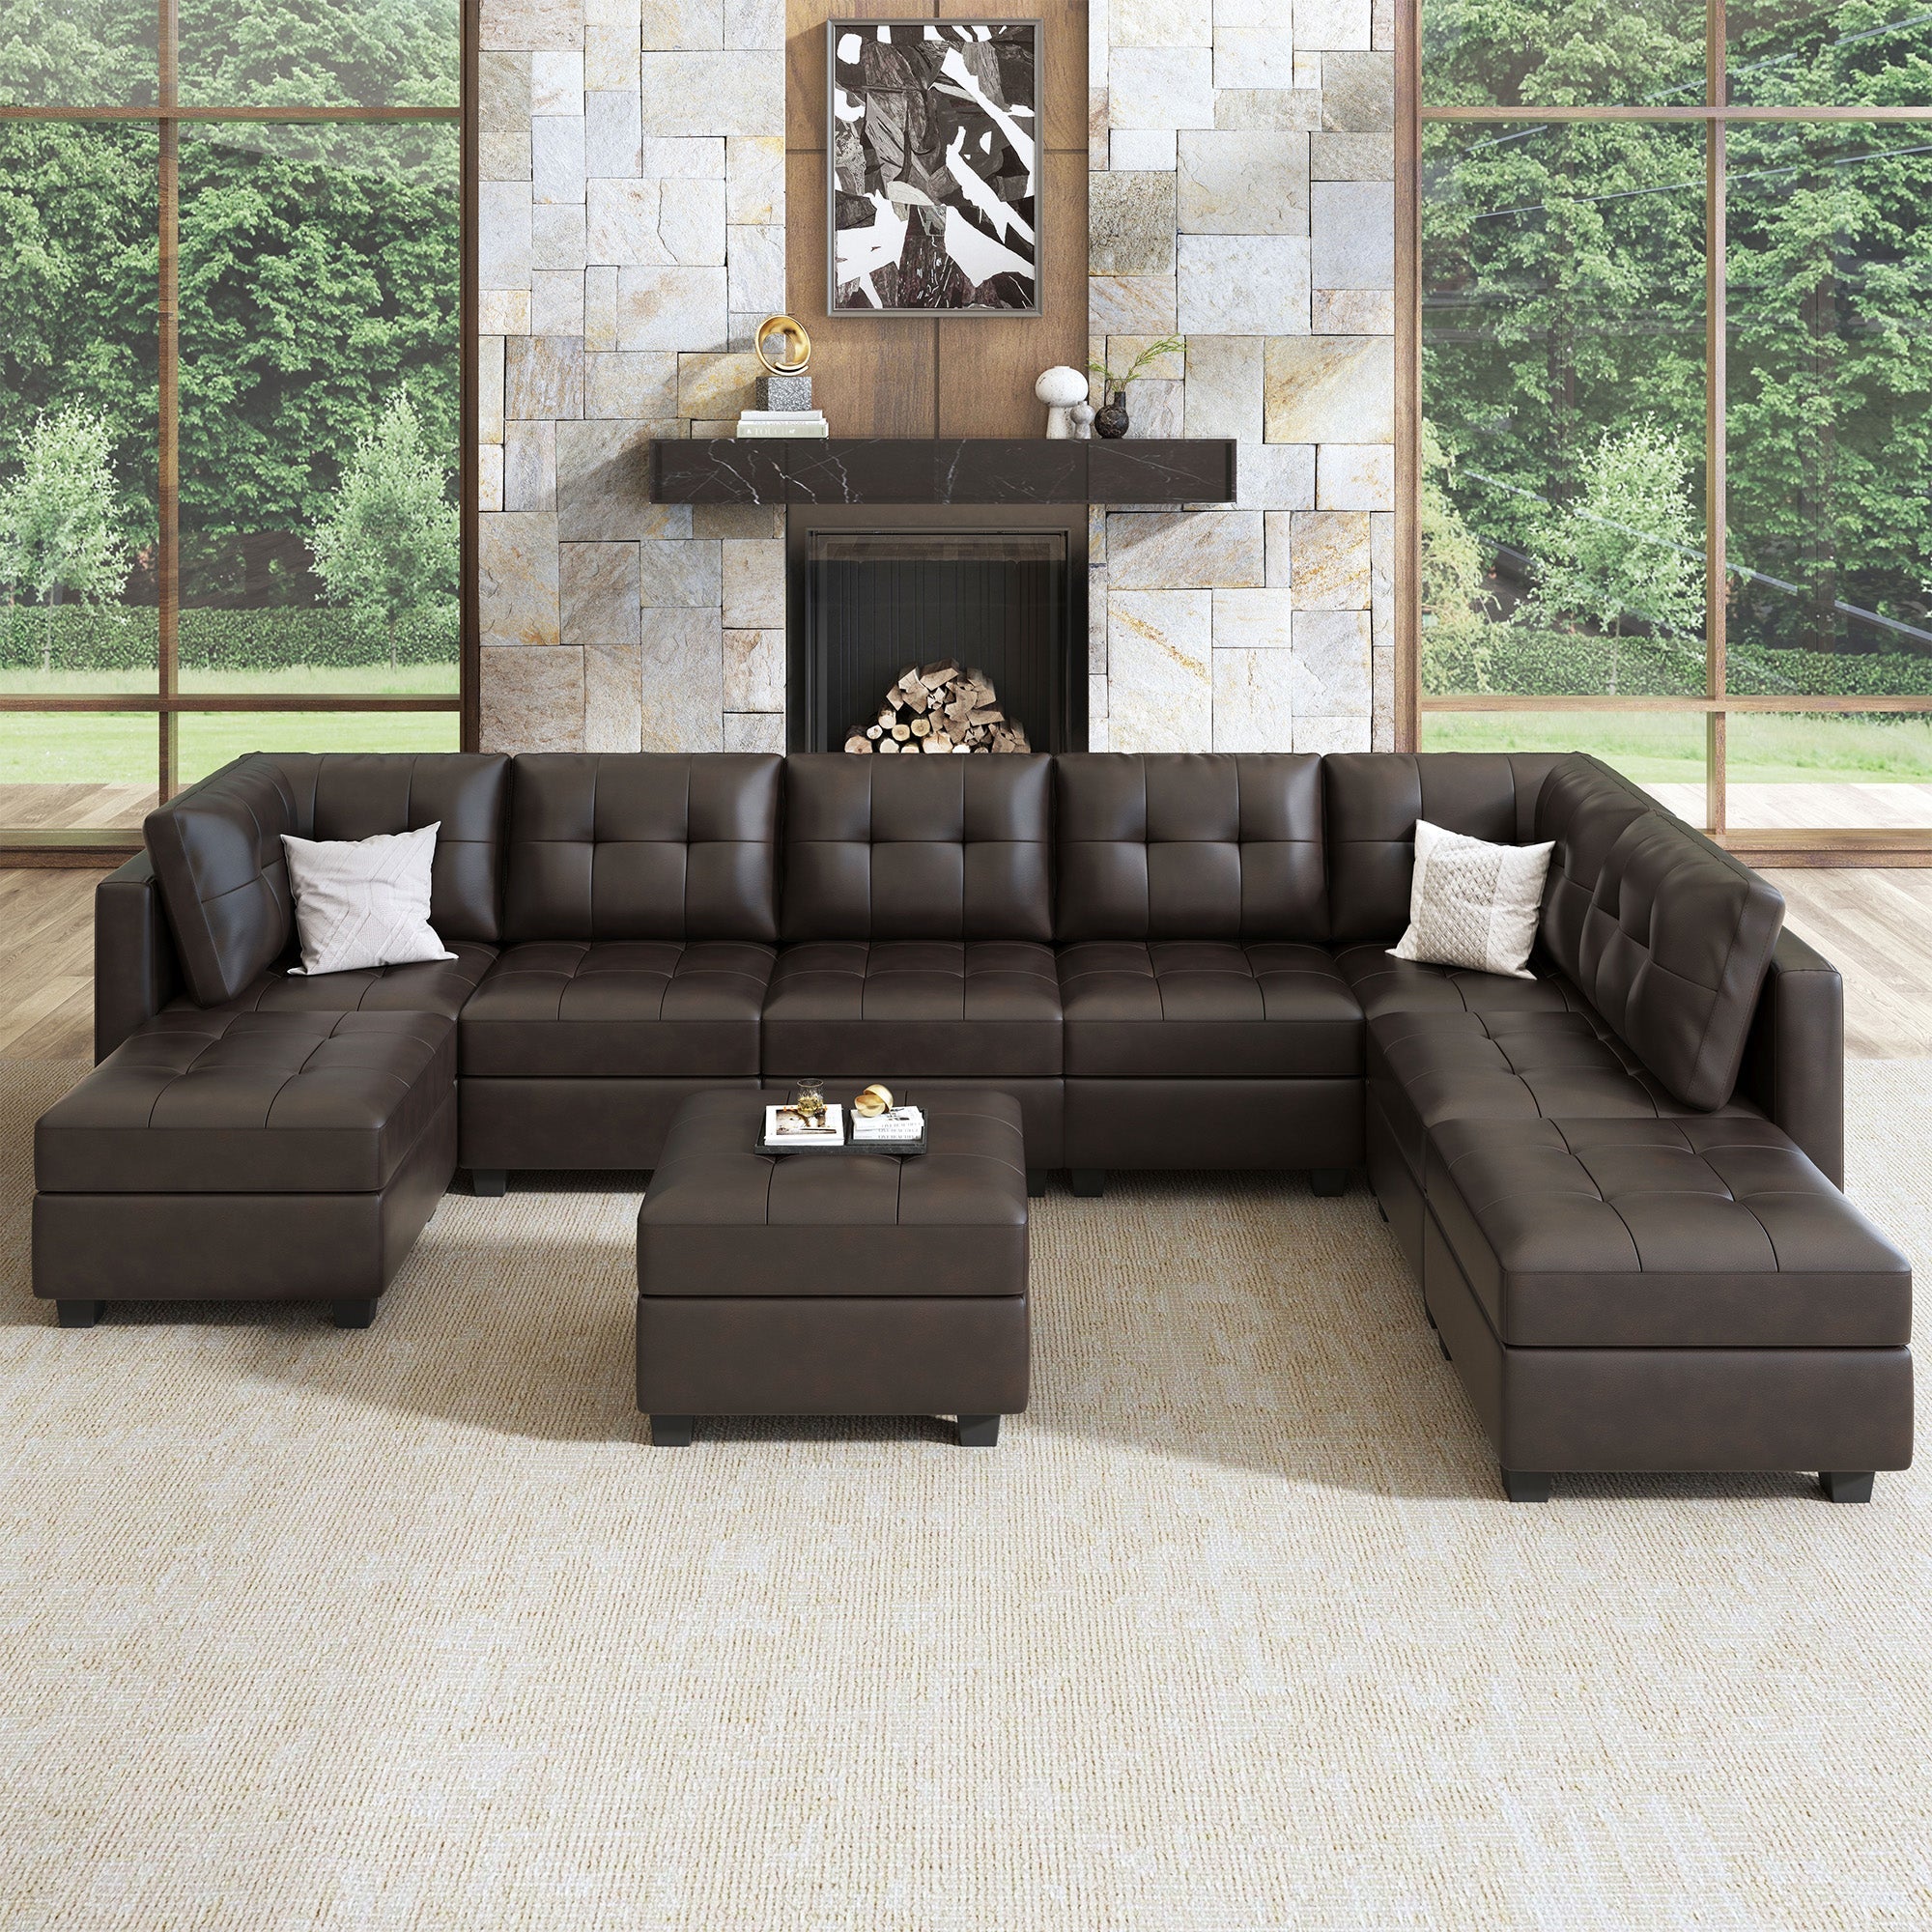 HONBAY 9-Piece Faux Leather Modular Sectional With Storage Seat